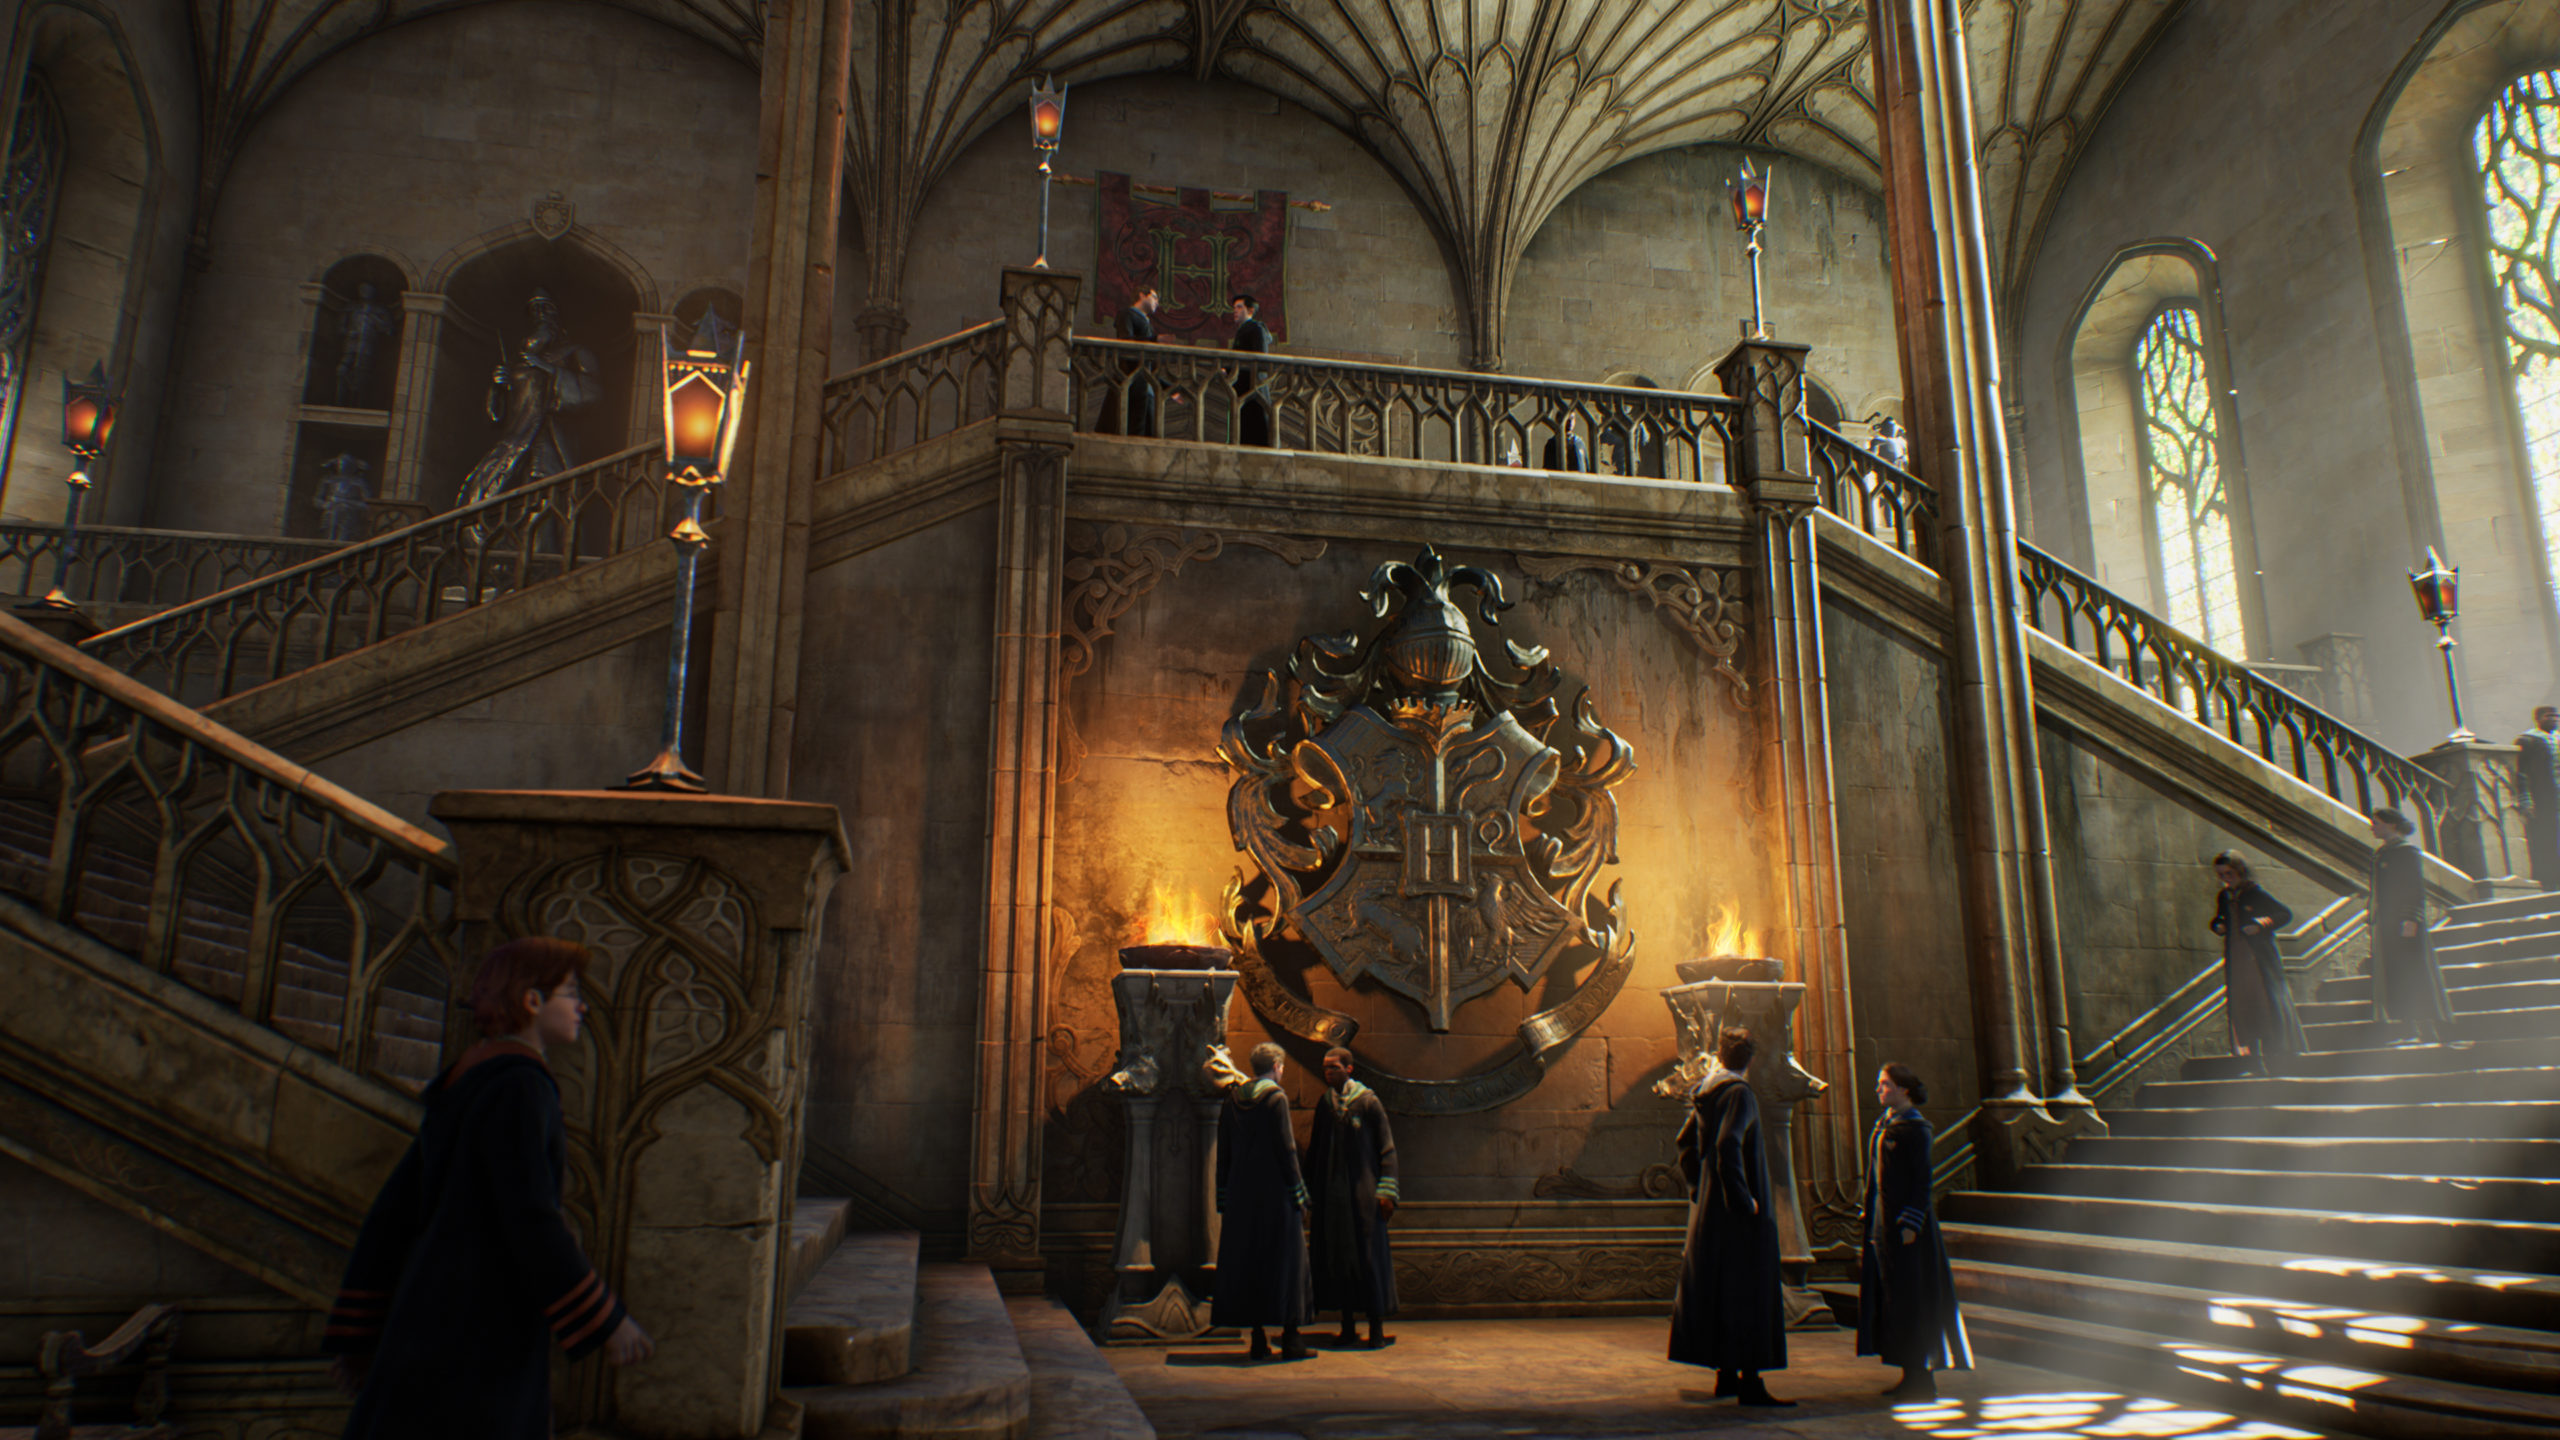 A screenshot from “Hogwarts Legacy” shows the grand entrance of Hogwarts School of Witchcraft and Wizardry.